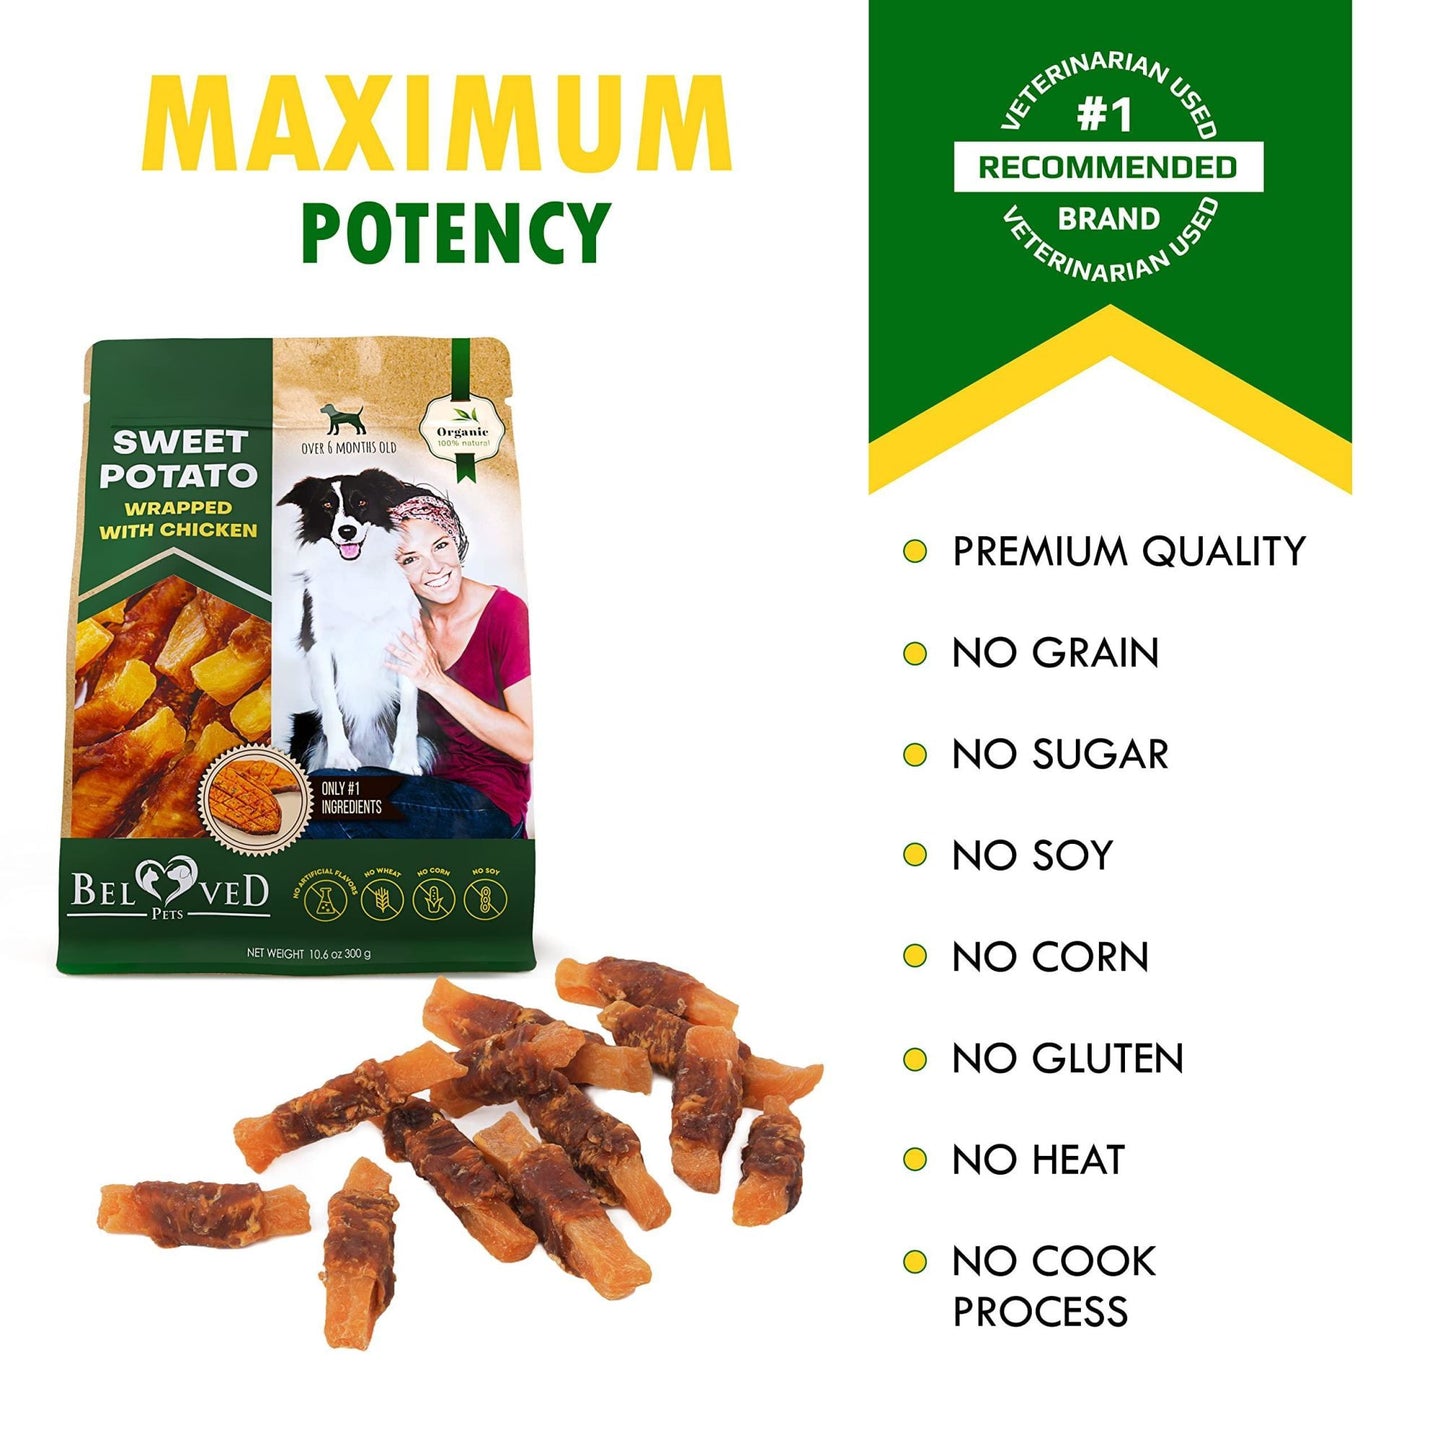 Dog Sweet Potato Wrapped with Chicken Pet Natural Chew Treats Grain Free Organic Meat Human Grade Dried Snacks in Bulk for Training for Small & Large Dogs Sweet Potato